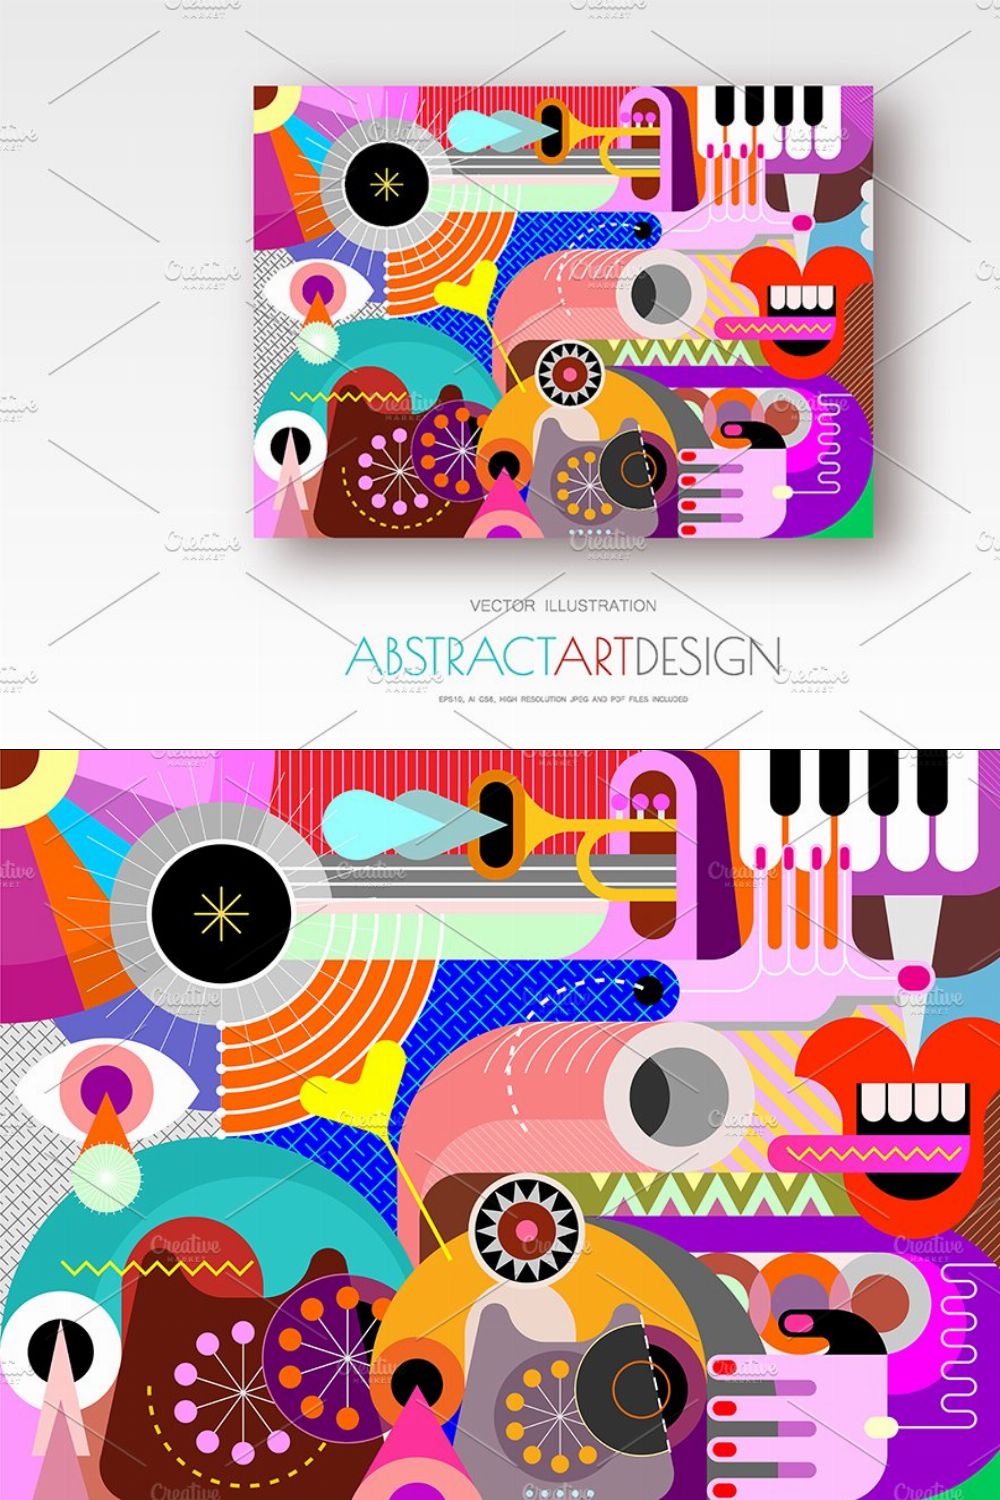 Abstract Art vector design pinterest preview image.